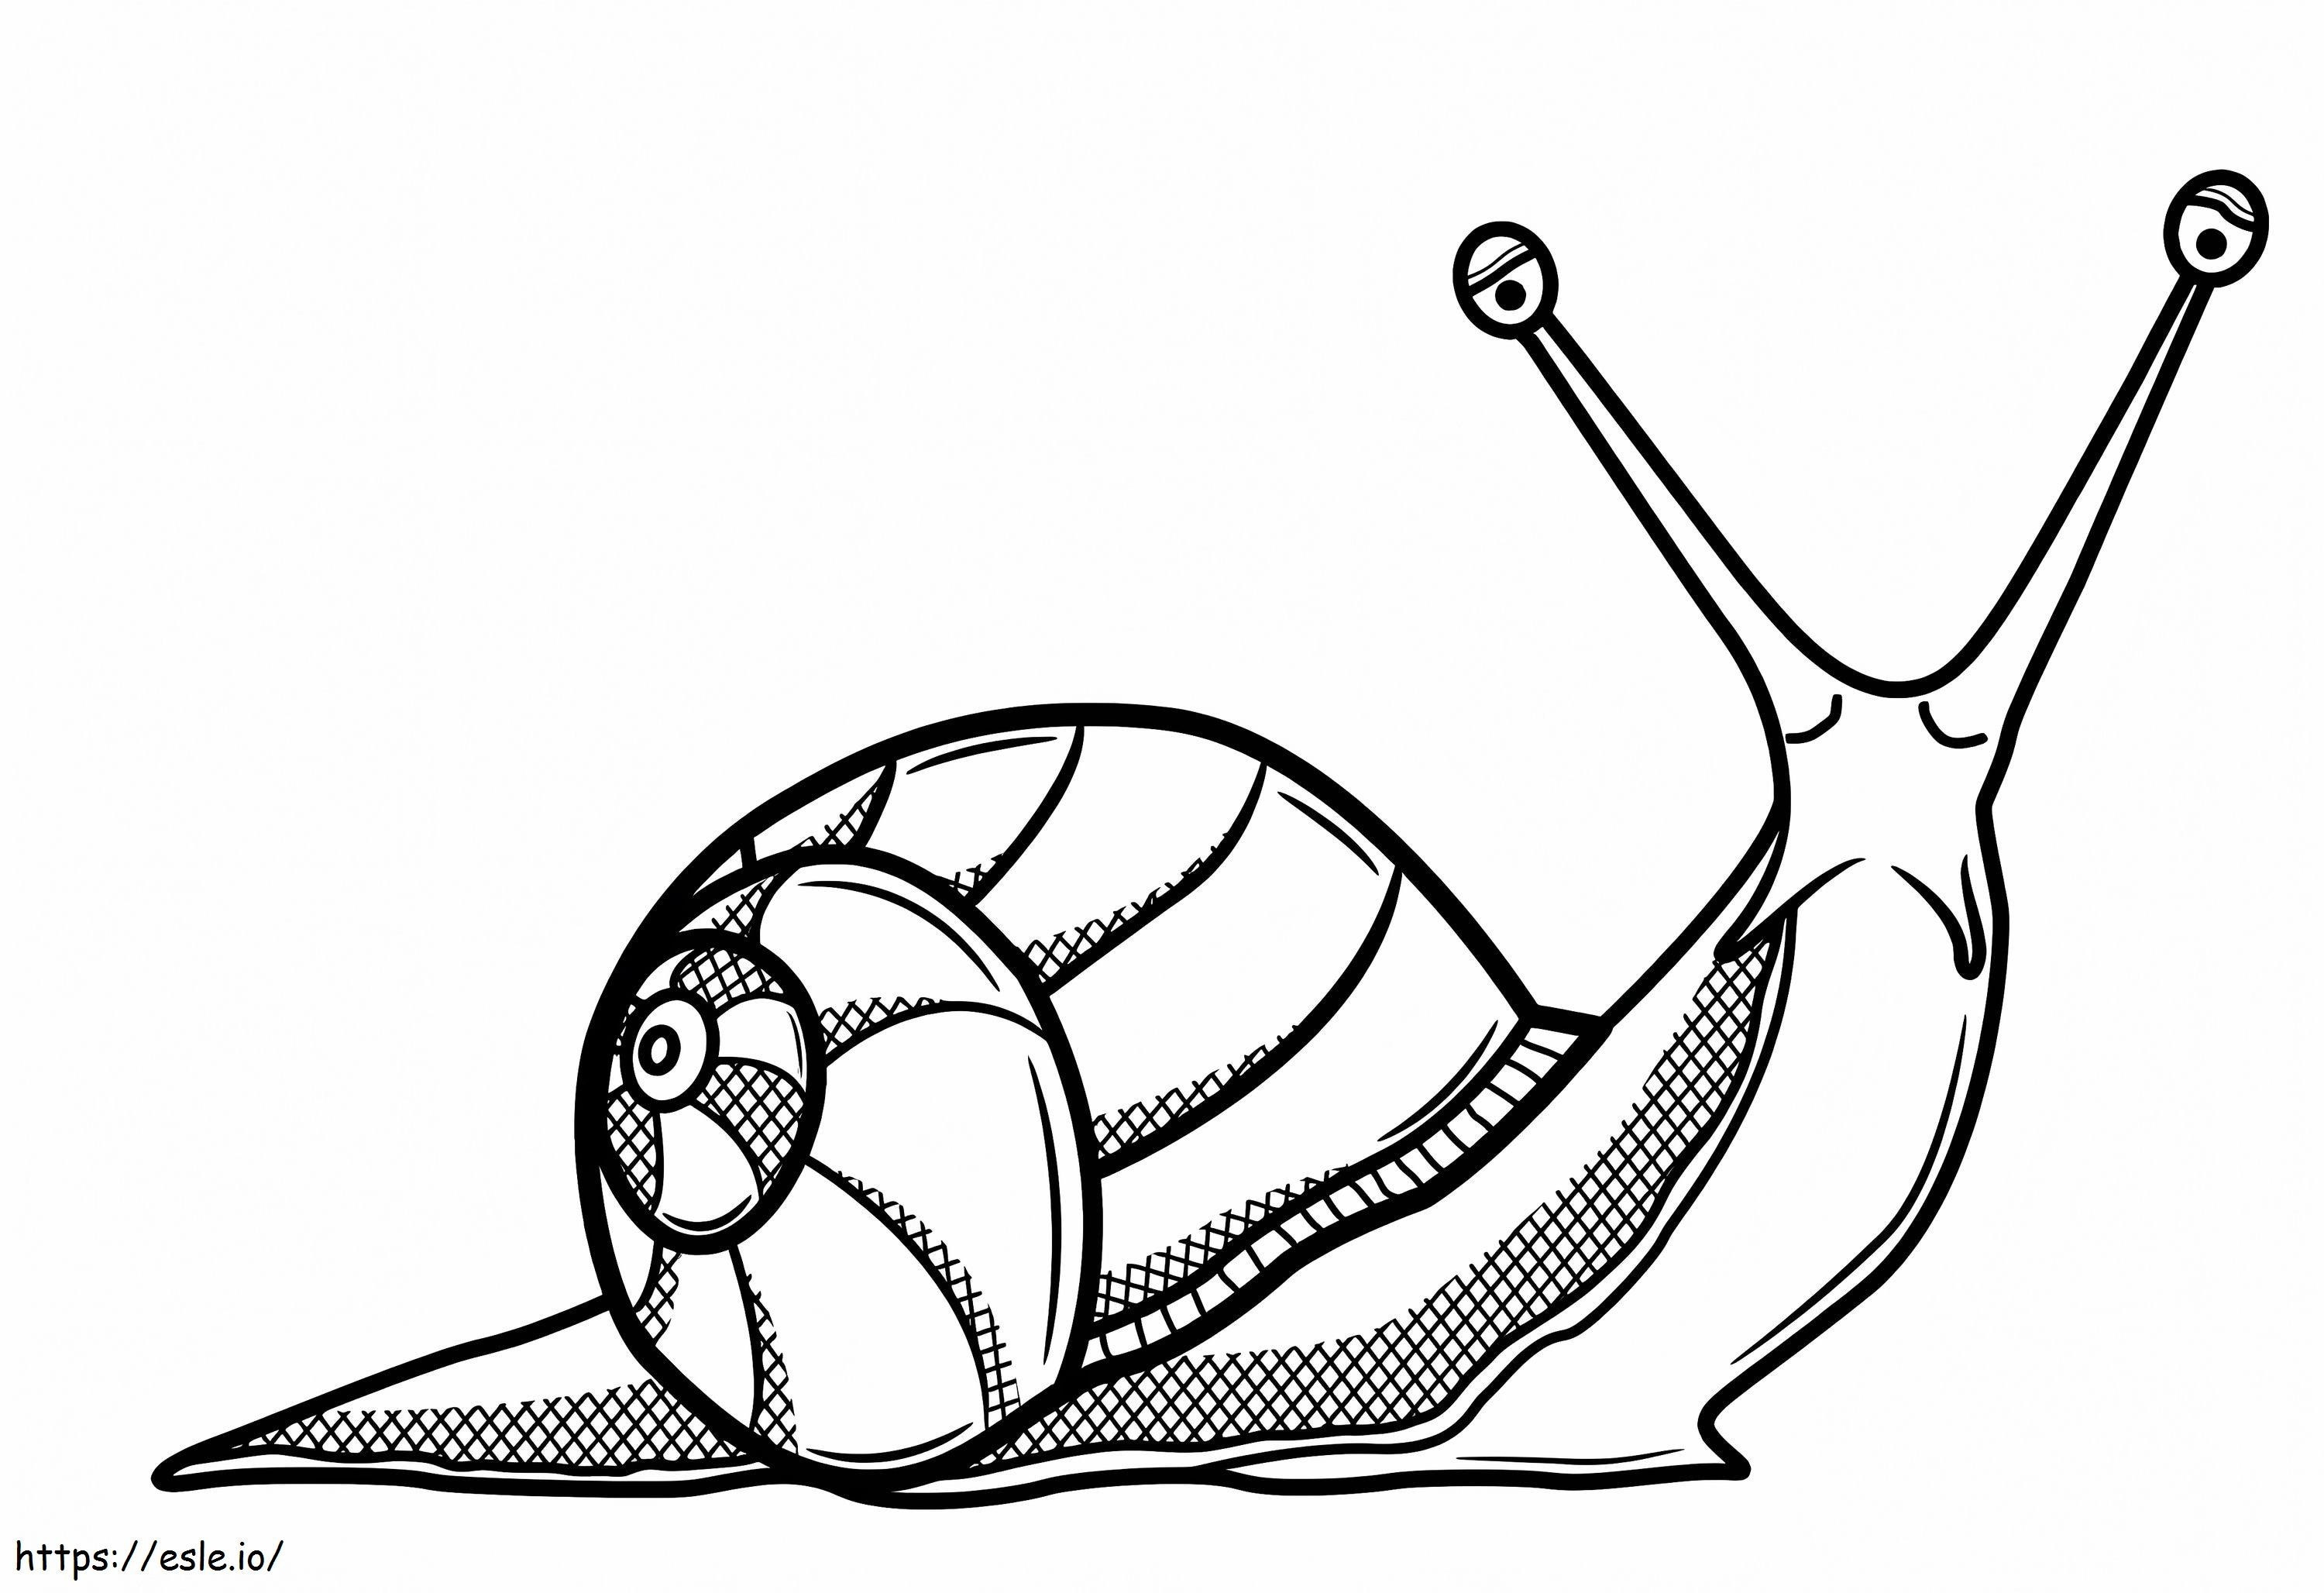 Beautiful Snail coloring page